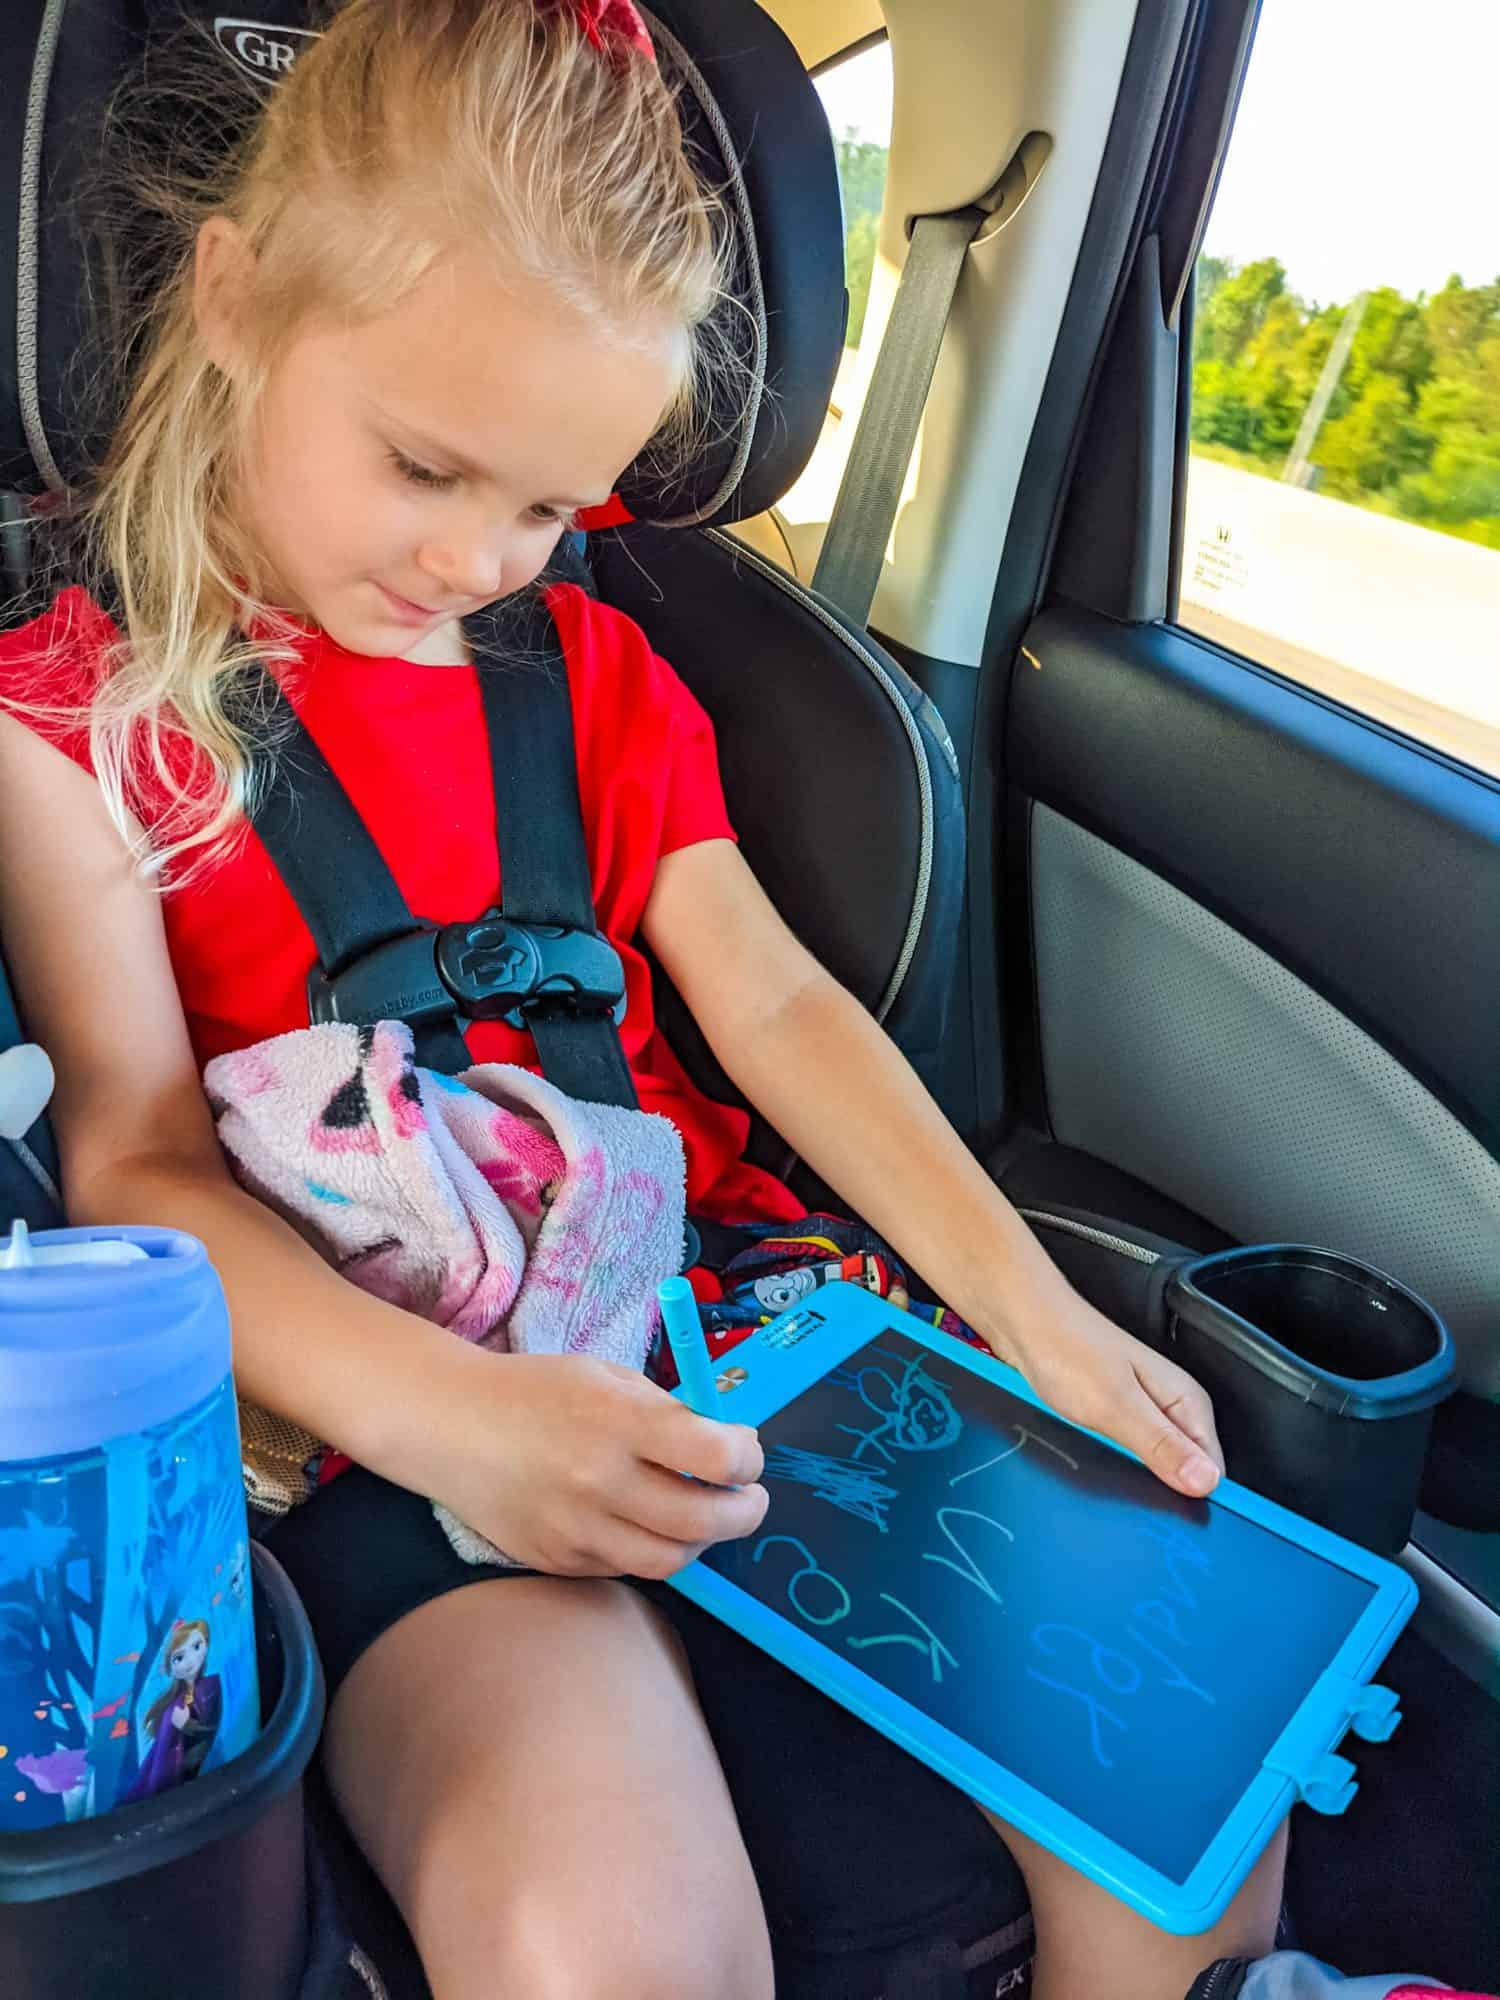 Screen free road trip ideas with kids, must haves when traveling with kids, favorite drawing toy